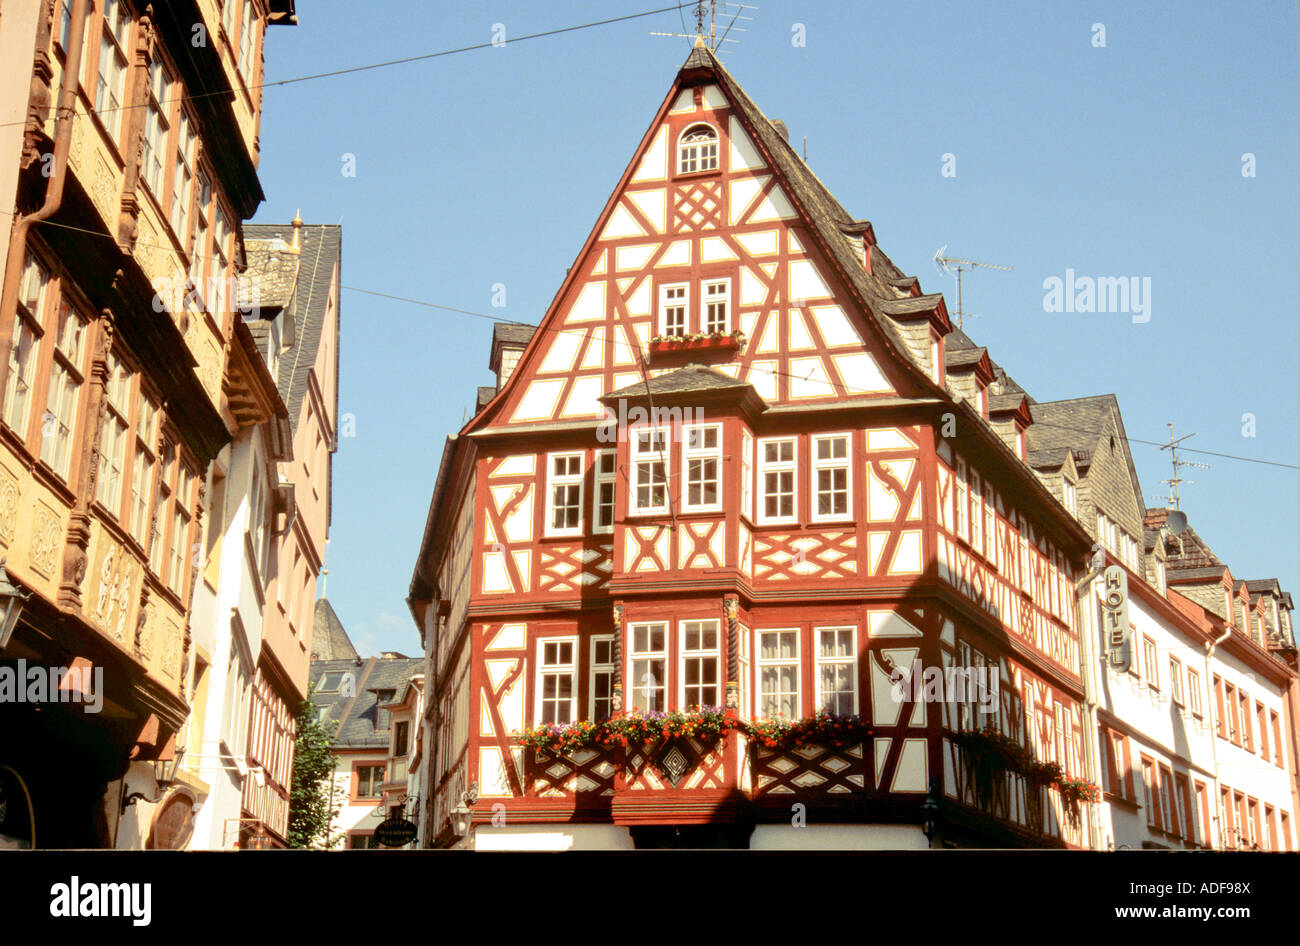 Half timbered house in Mainz Germany Stock Photo